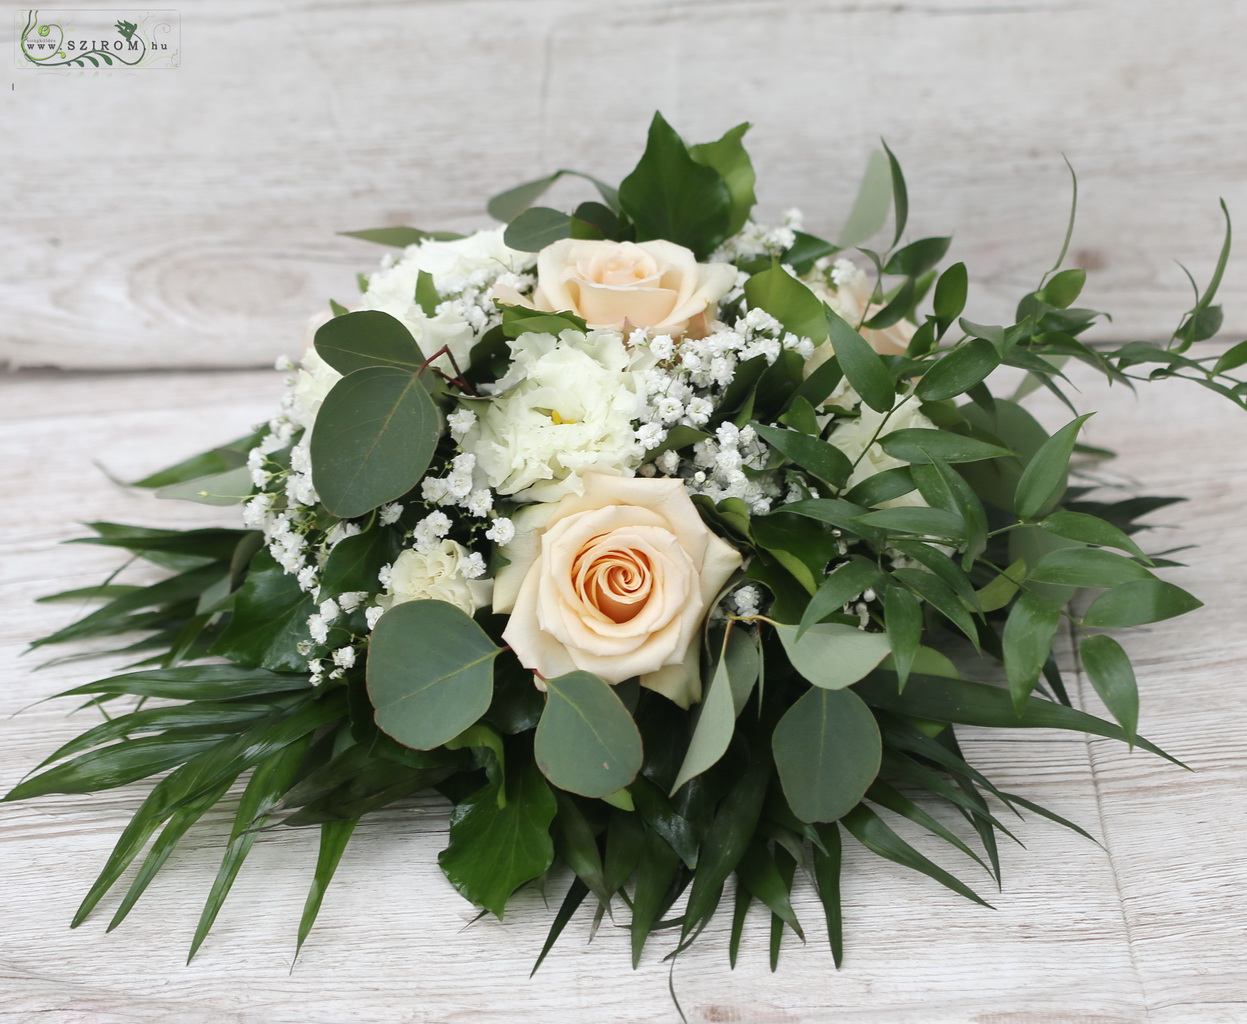 flower delivery Budapest - Table decoration with many greens (rose, babybreath, lisianthus, peach, cream, green)